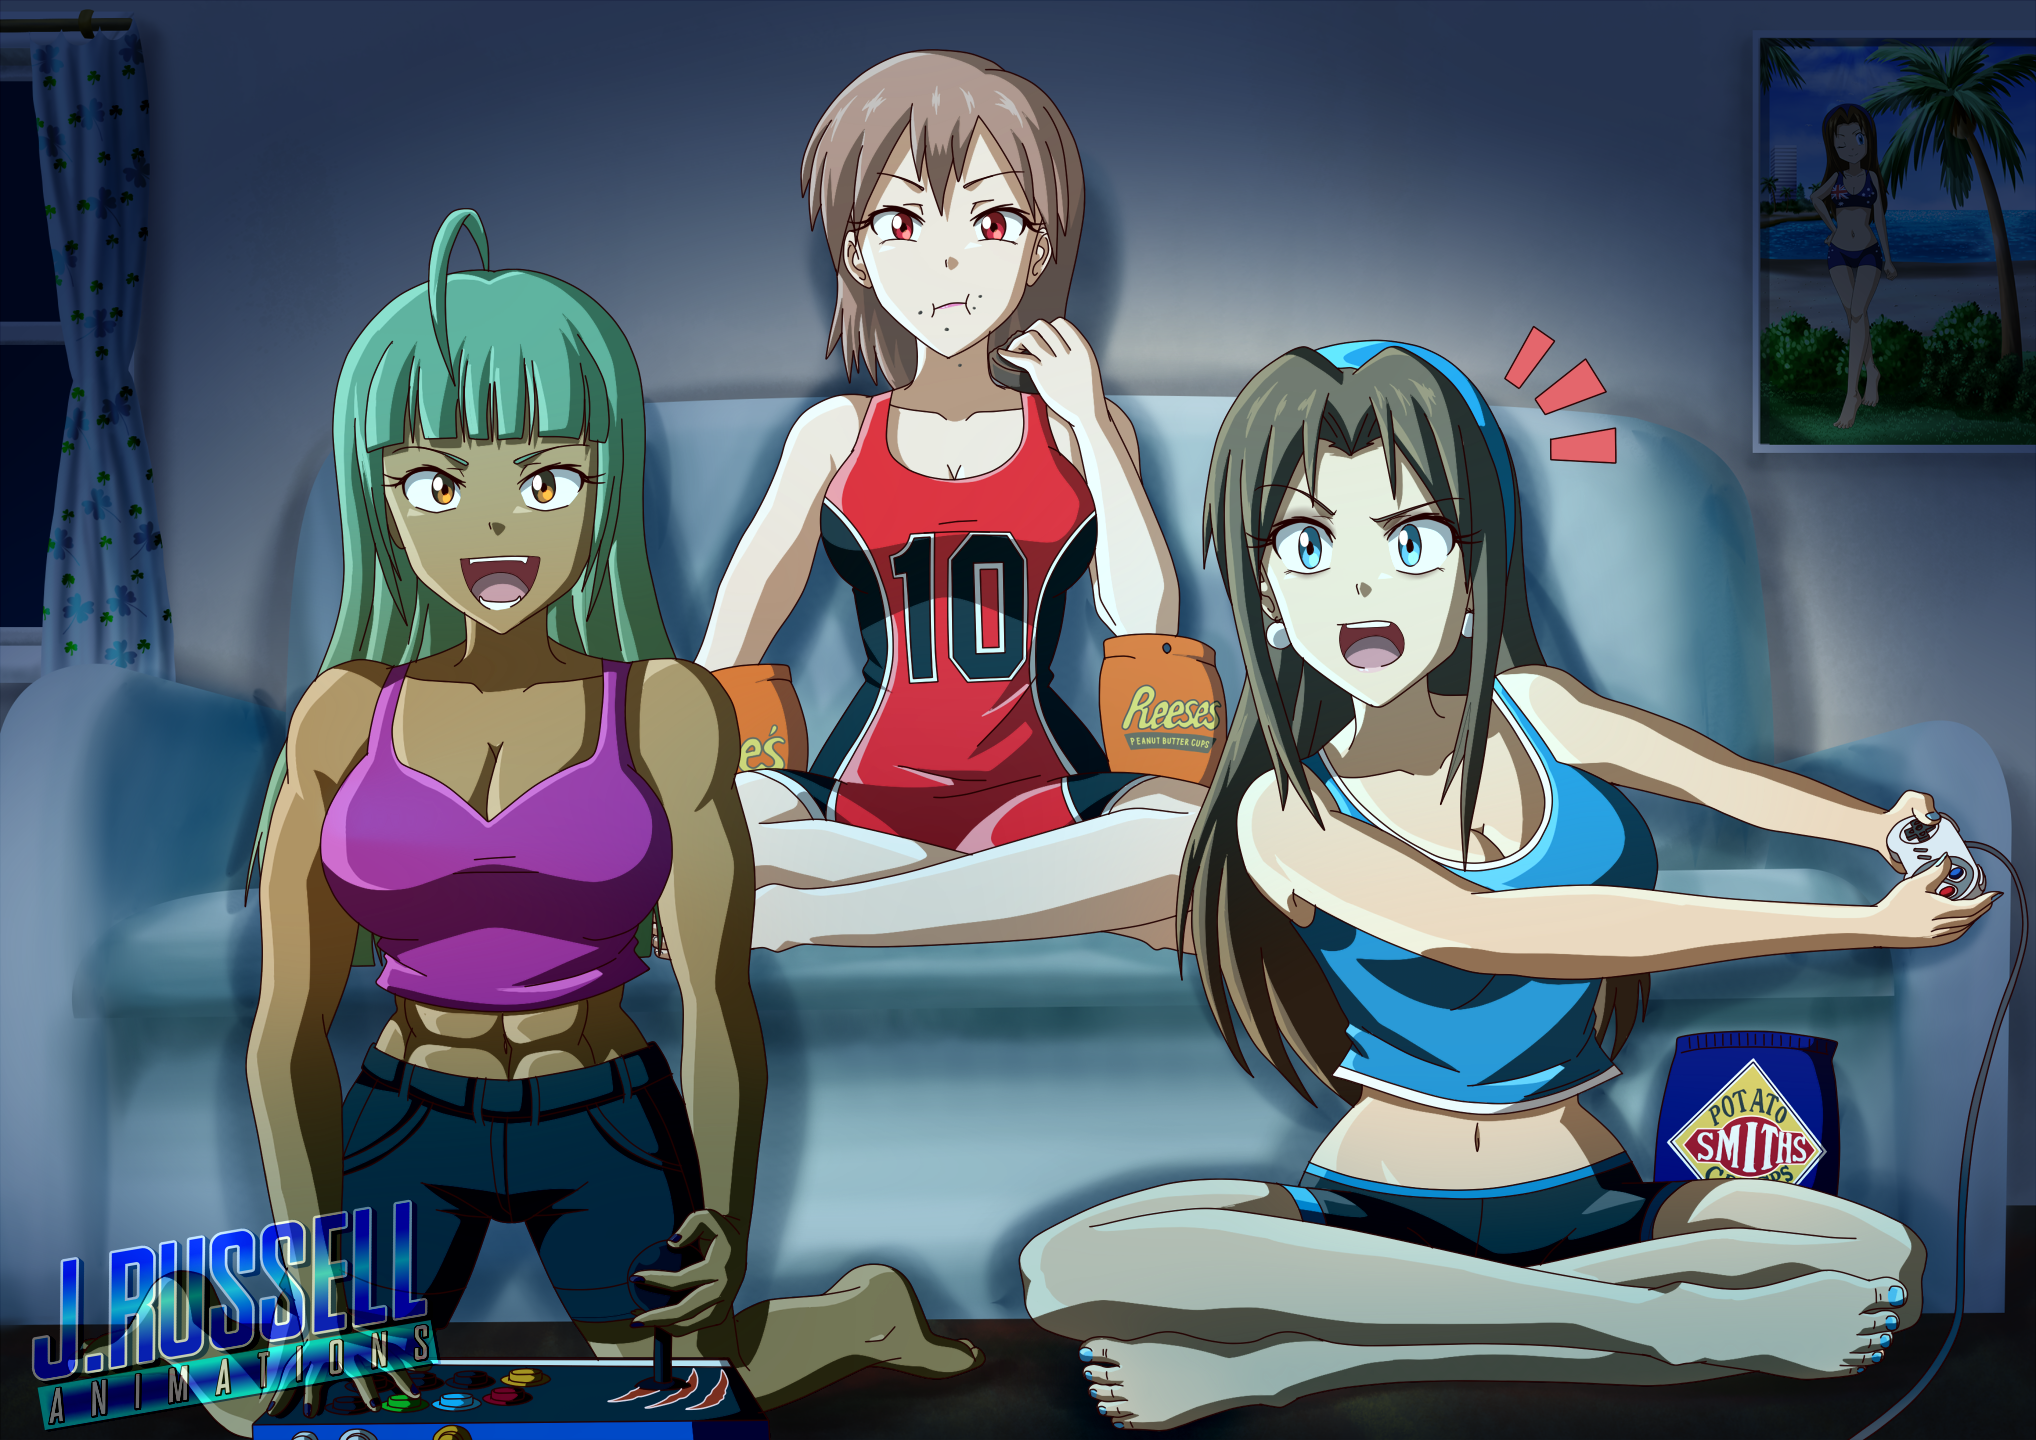 Late night gaming session - Yumiko, Noelle & Amber by JRussellAnimations